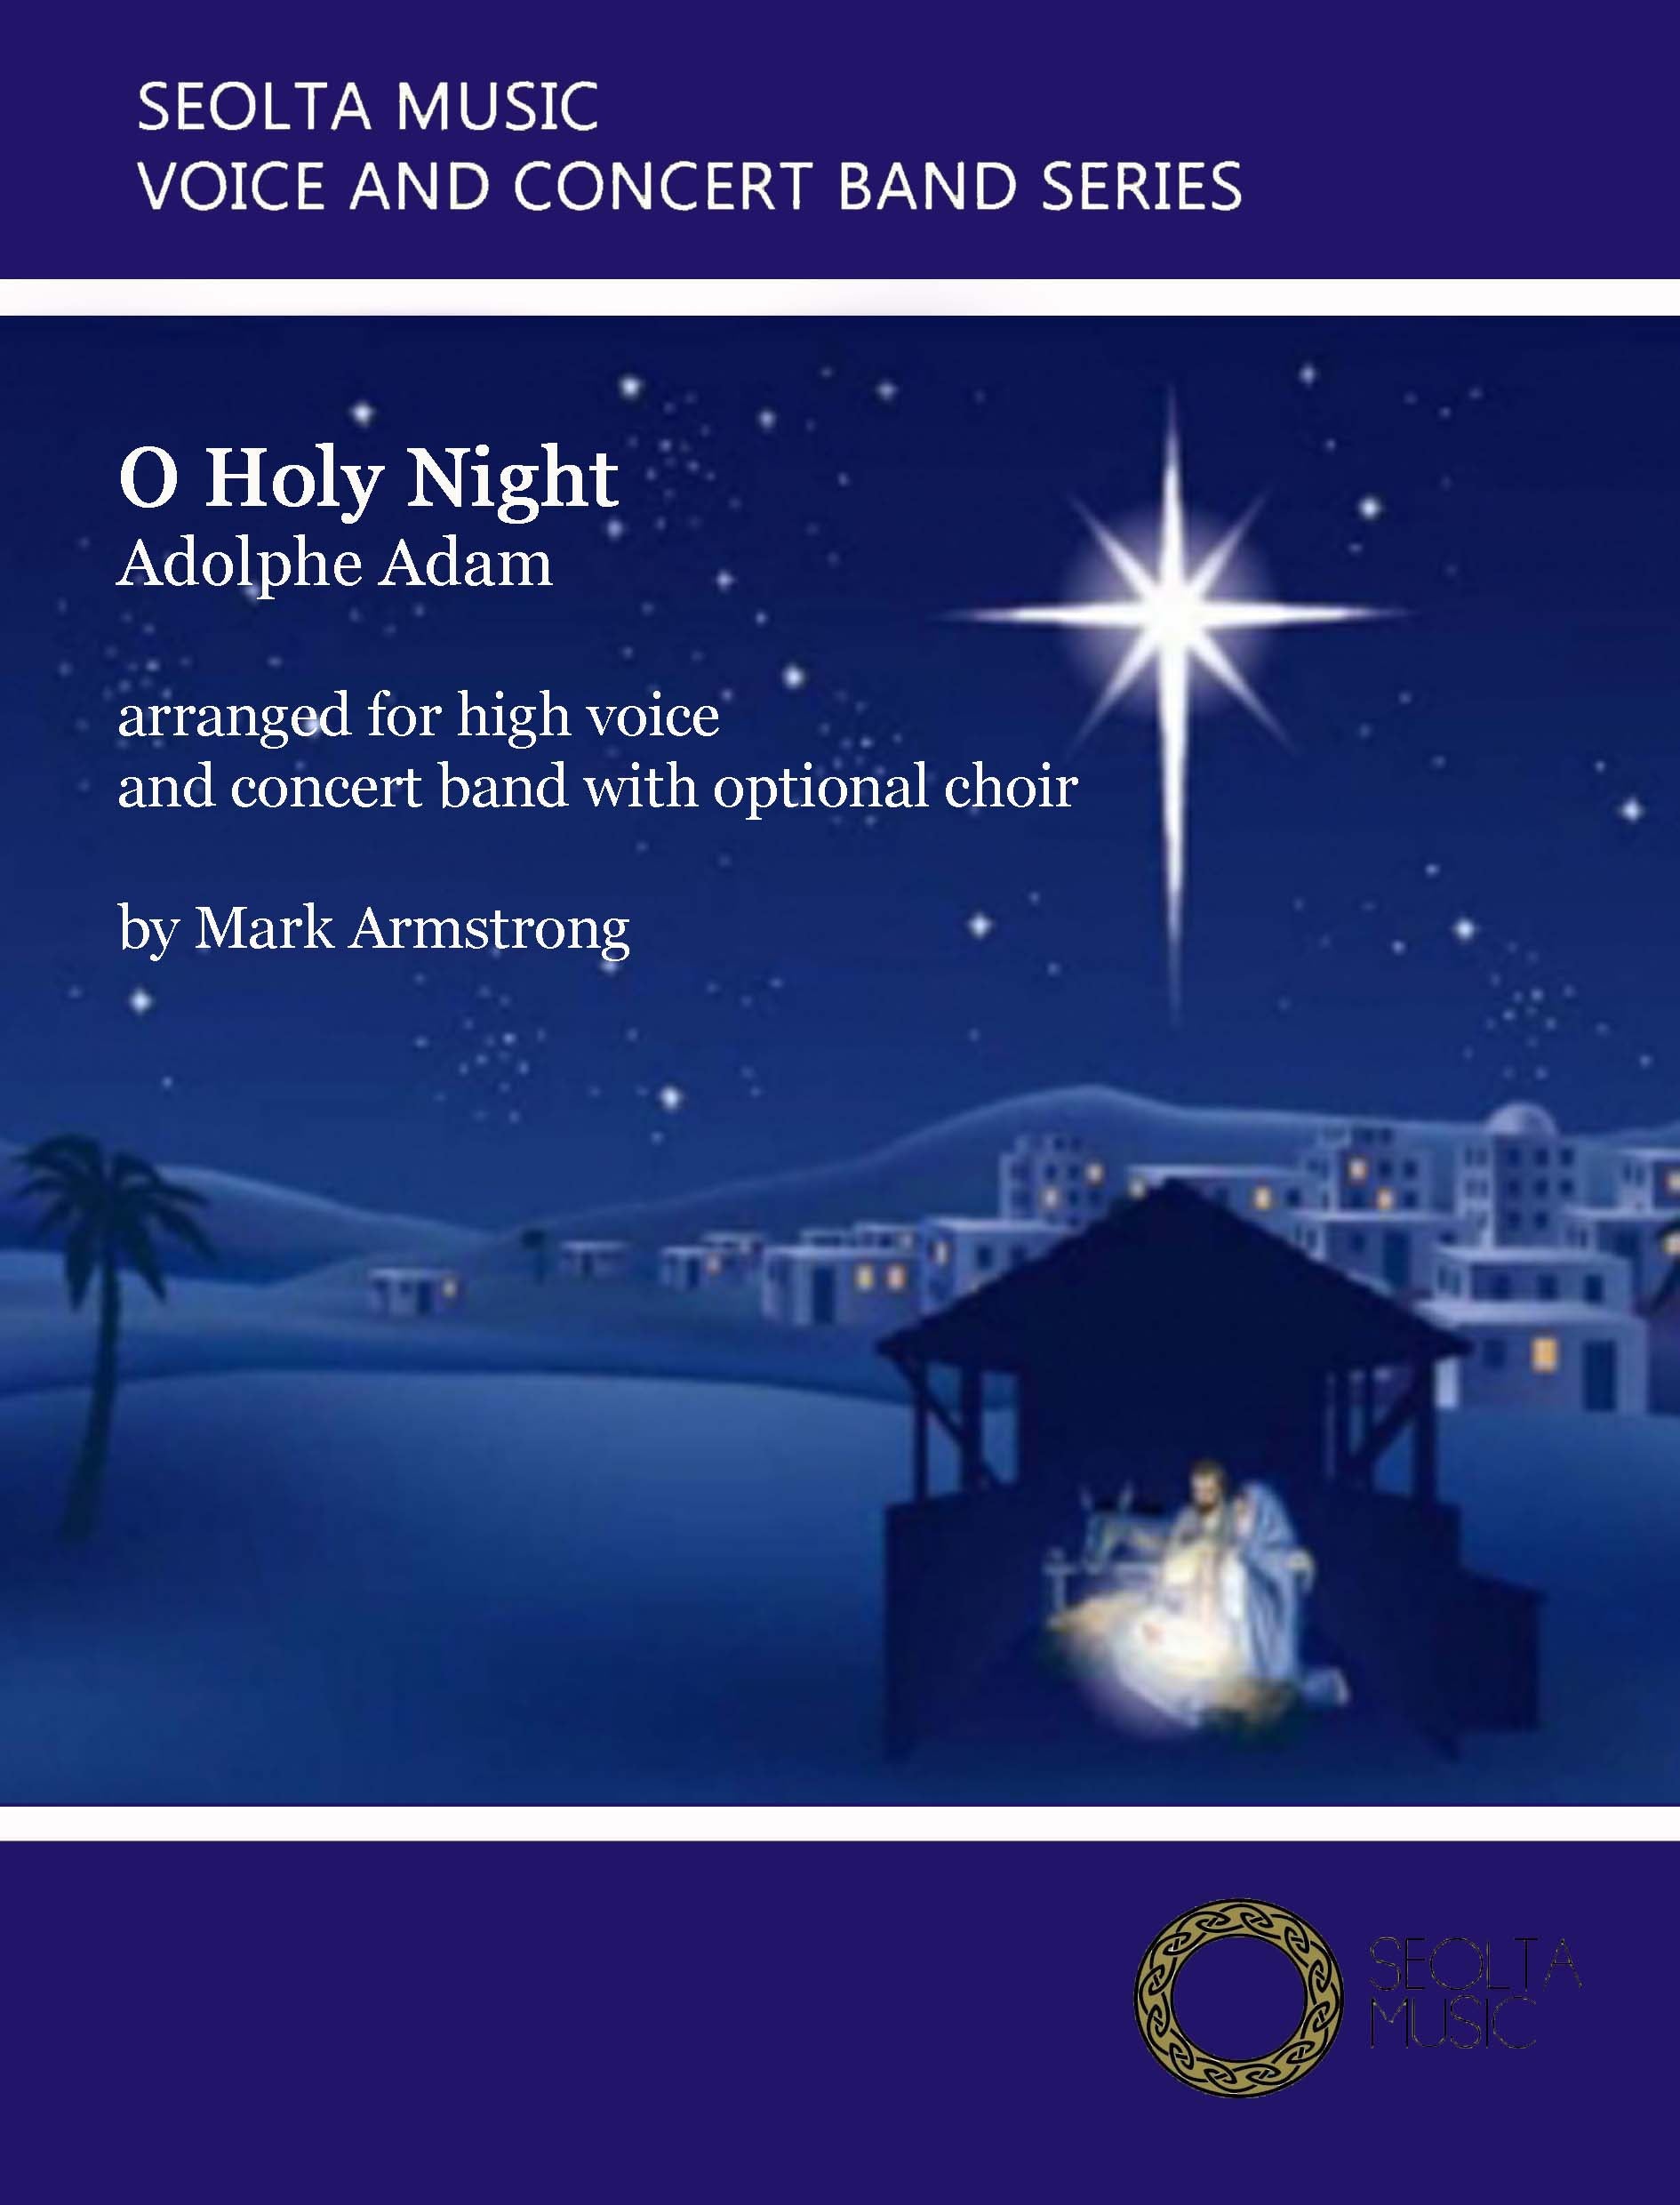 o-holy-night-christmas-song-adolphe-adam-voice-band-sheet-music